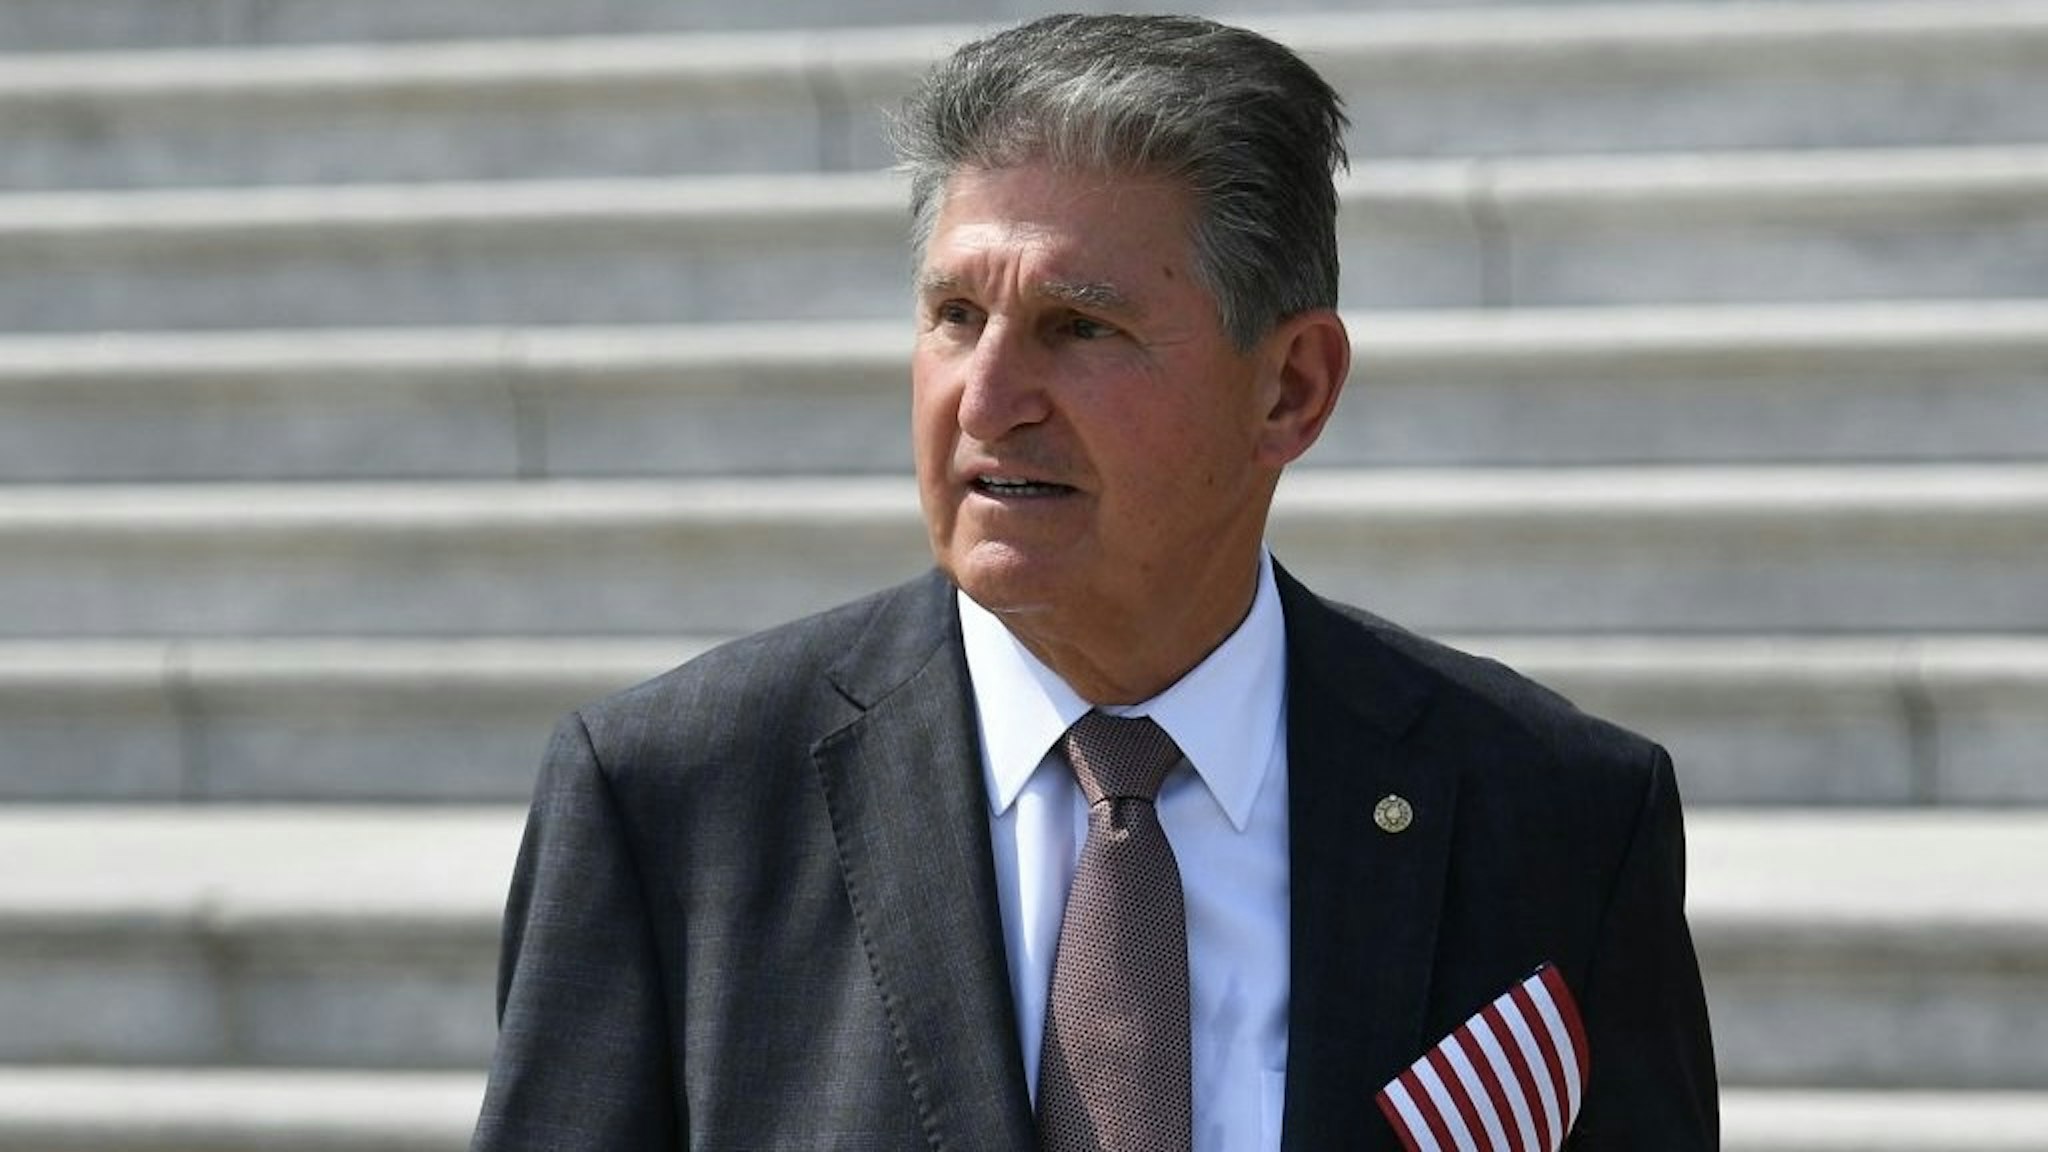 US-ATTACKS-CONGRESS-9/11-ANNIVERSARY Senator Joe Manchin (D-WVA) is seen after a ceremony to commemorate the 20th anniversary of the 9/11 attacks on the steps of the US Capitol in Washington, DC on September 13, 2021. (Photo by MANDEL NGAN / AFP) (Photo by MANDEL NGAN/AFP via Getty Images) MANDEL NGAN / Contributor